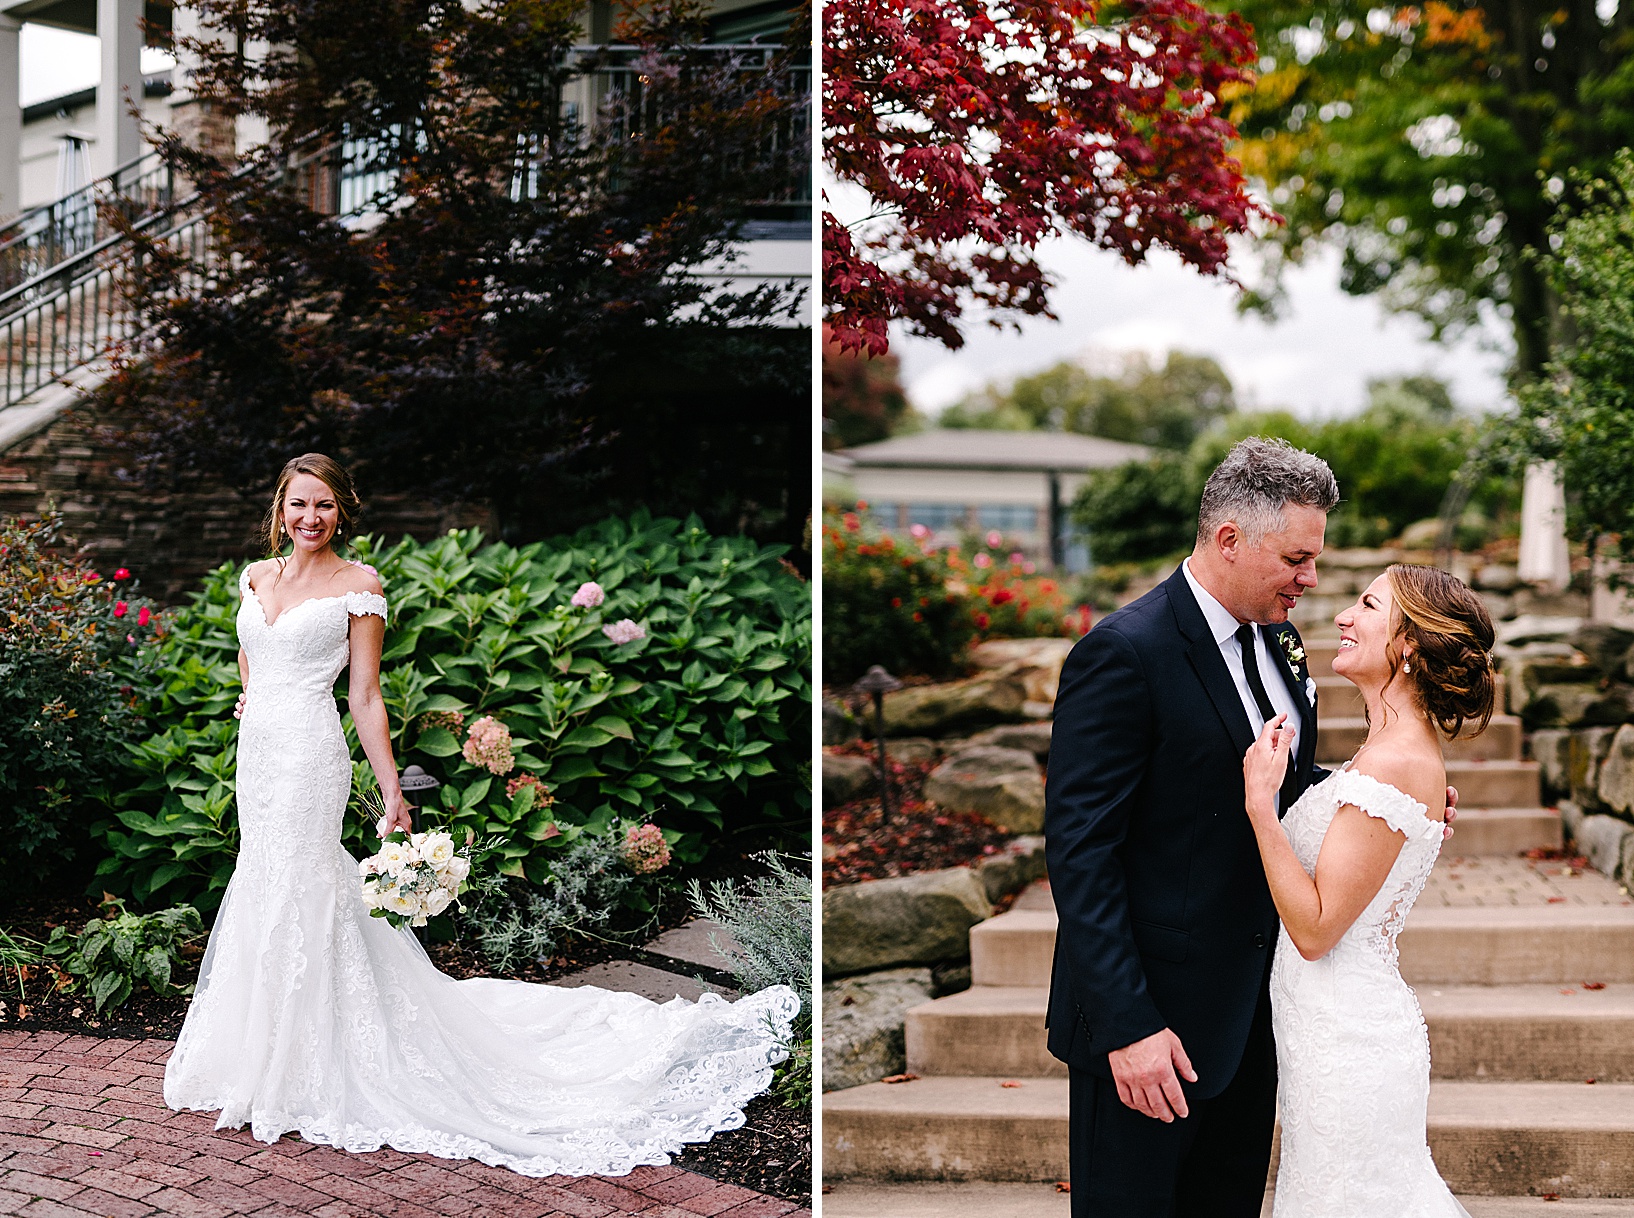 The bride and groom smile at each other with red fall foliage peaking through beside them